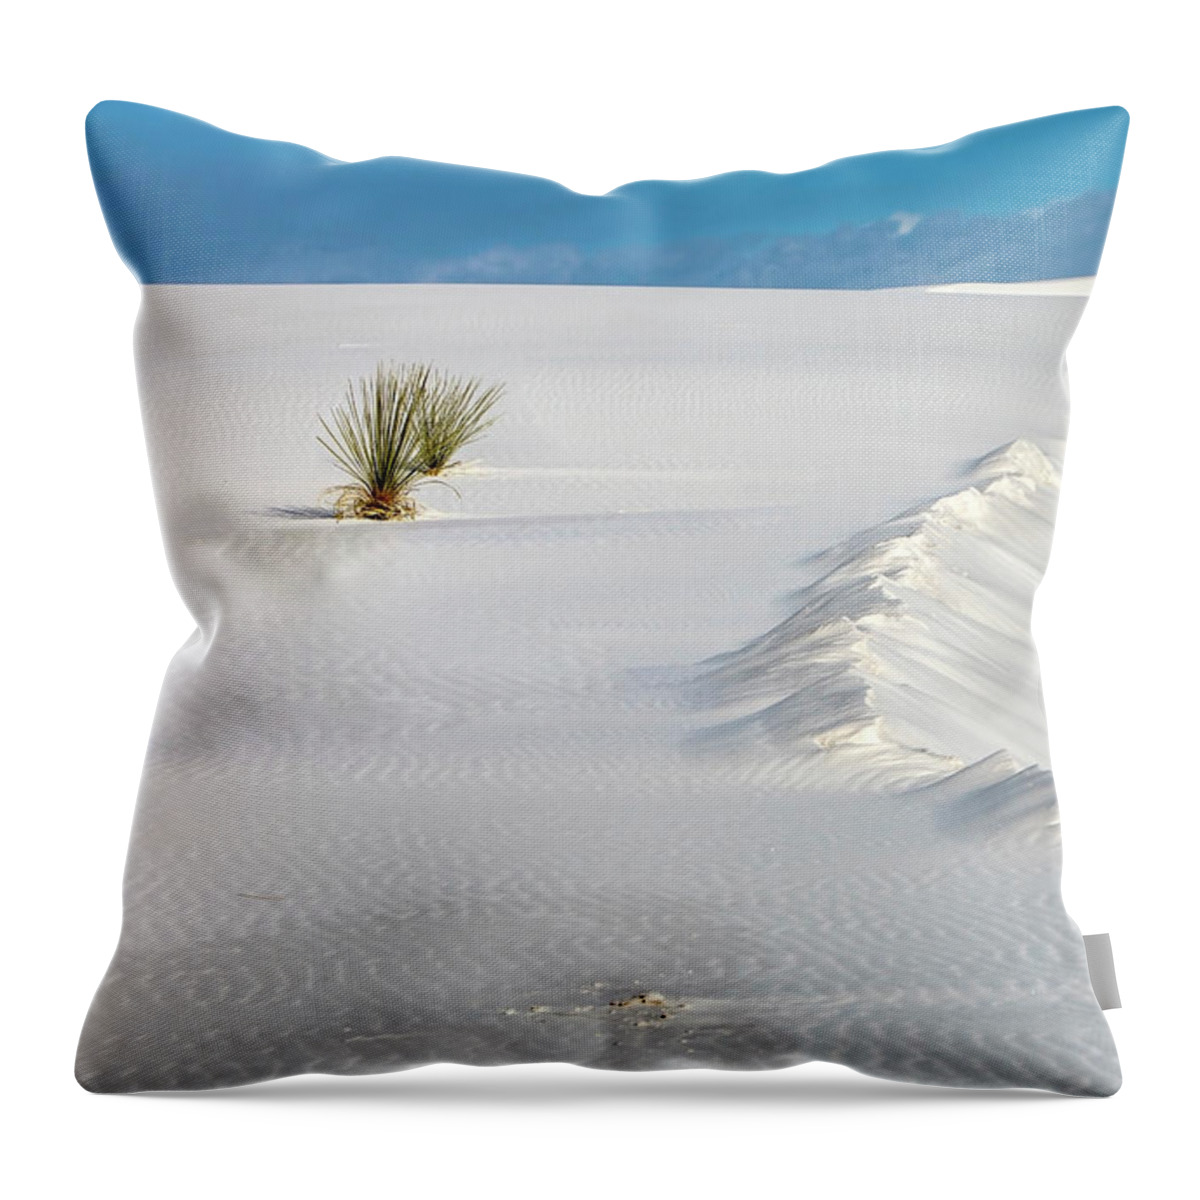 White Sands Throw Pillow featuring the photograph White Sands Still Life by Harriet Feagin